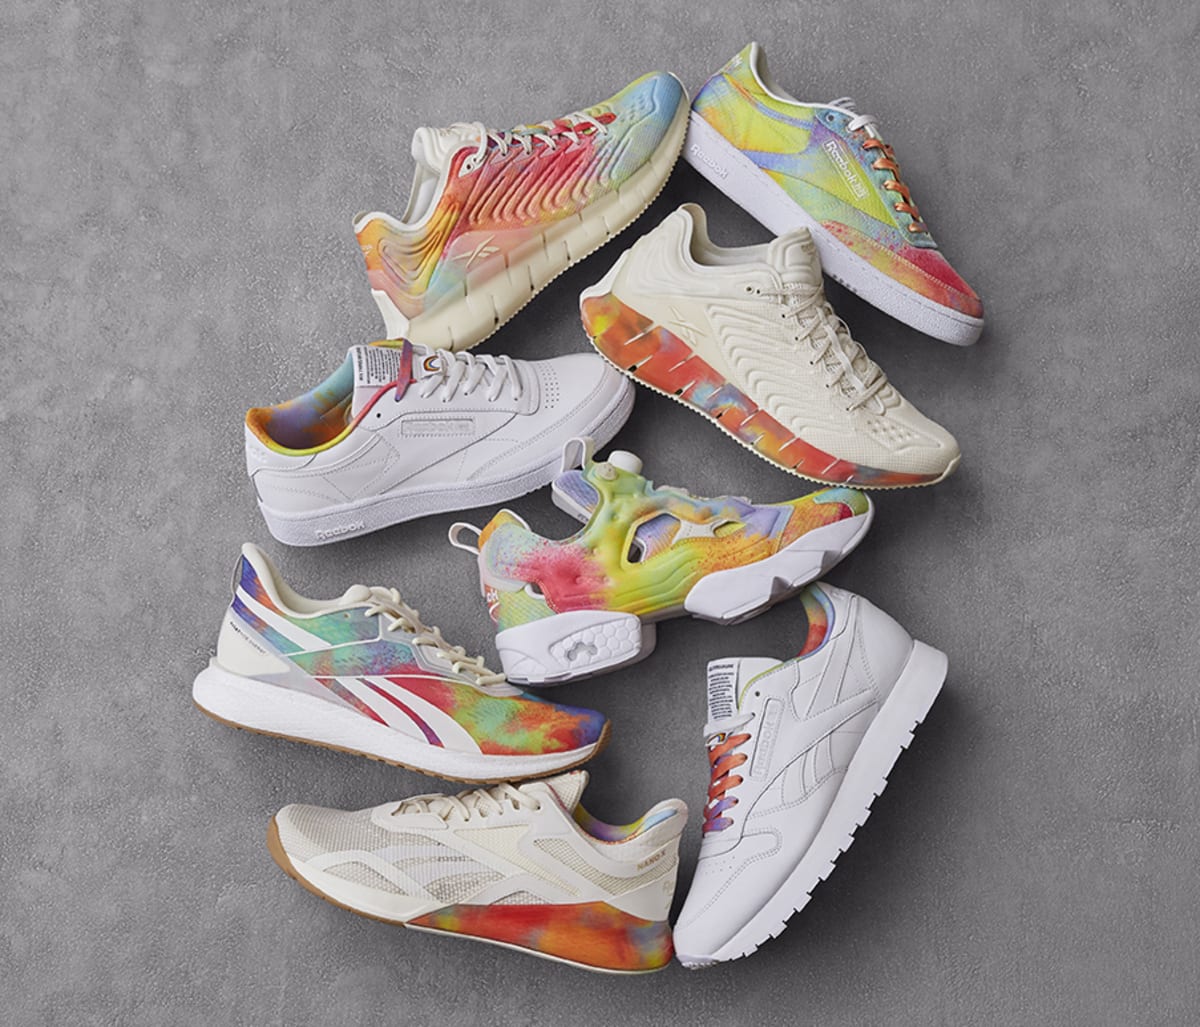 Reebok 'All Types of Love' Collection - Sneaker Release Guide 5/19/20 ...